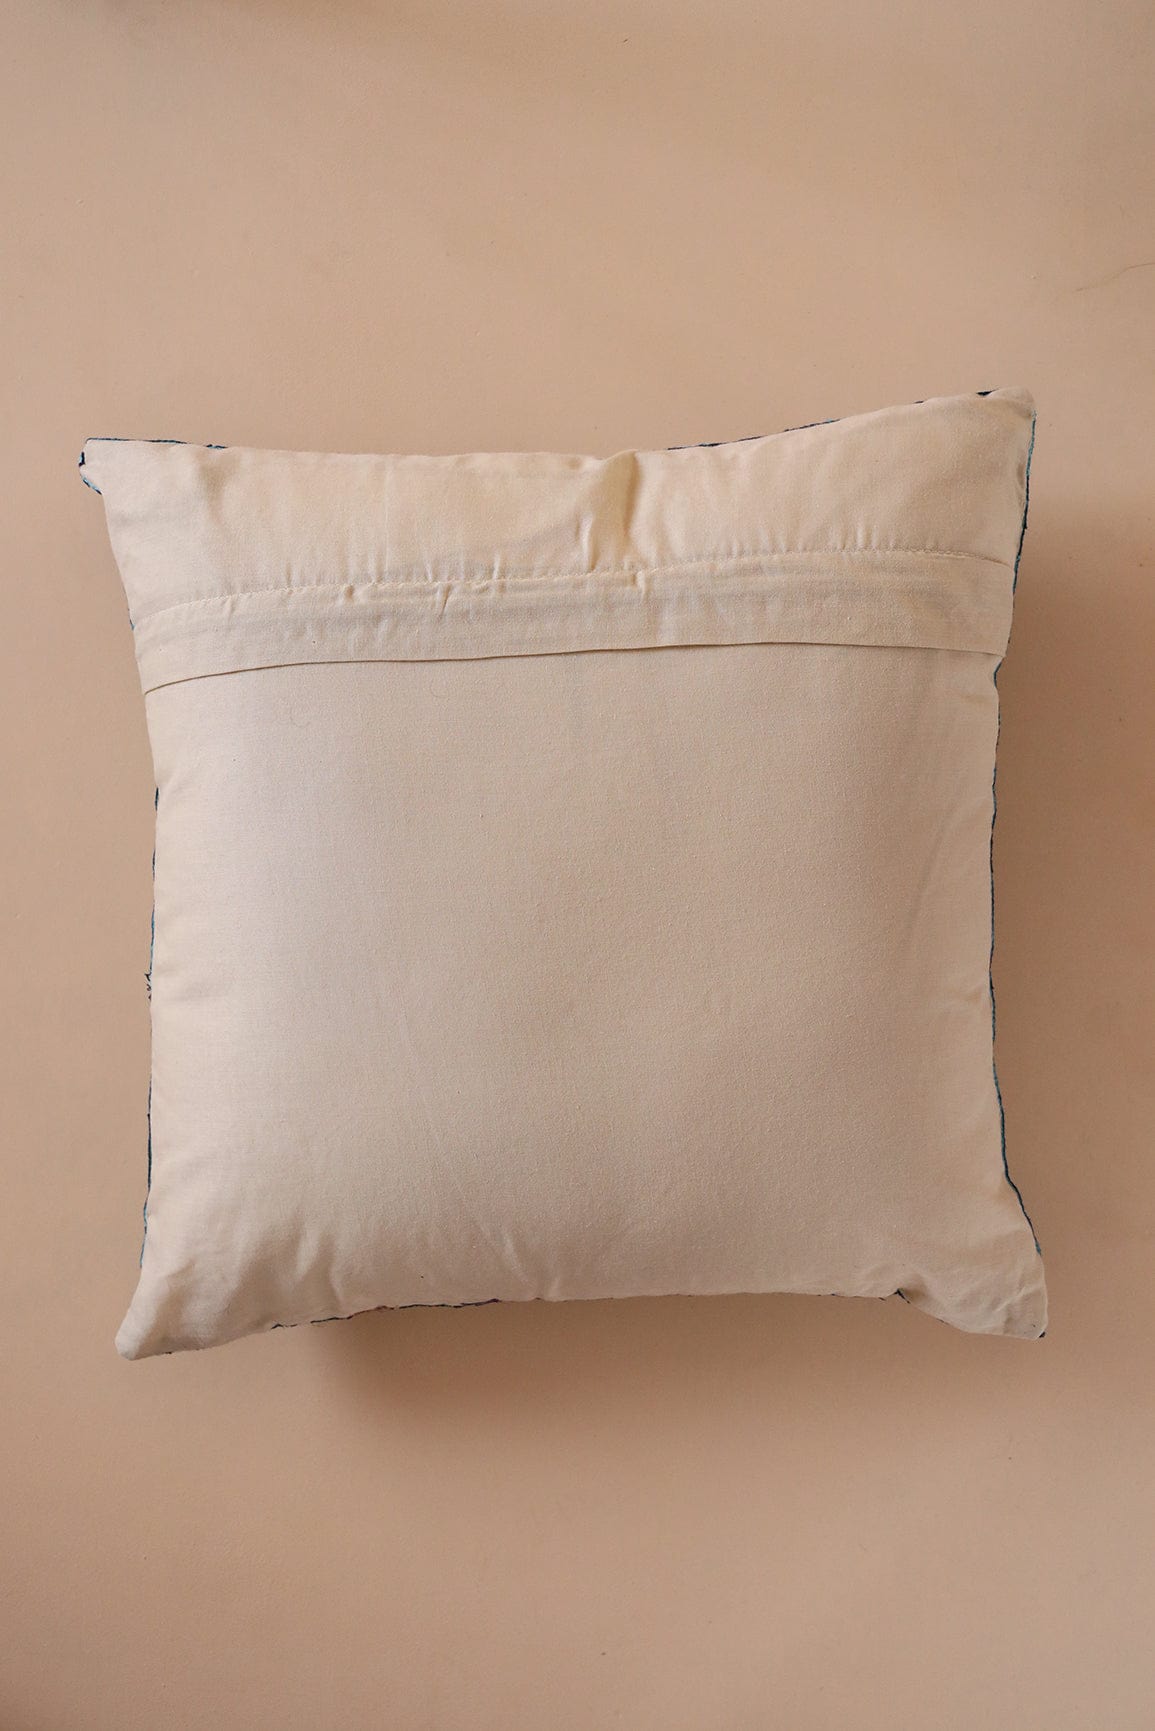 doeraa Royal Blue and Sky Blue Embroidery on off white cotton Cushion Cover (16*16 inches)